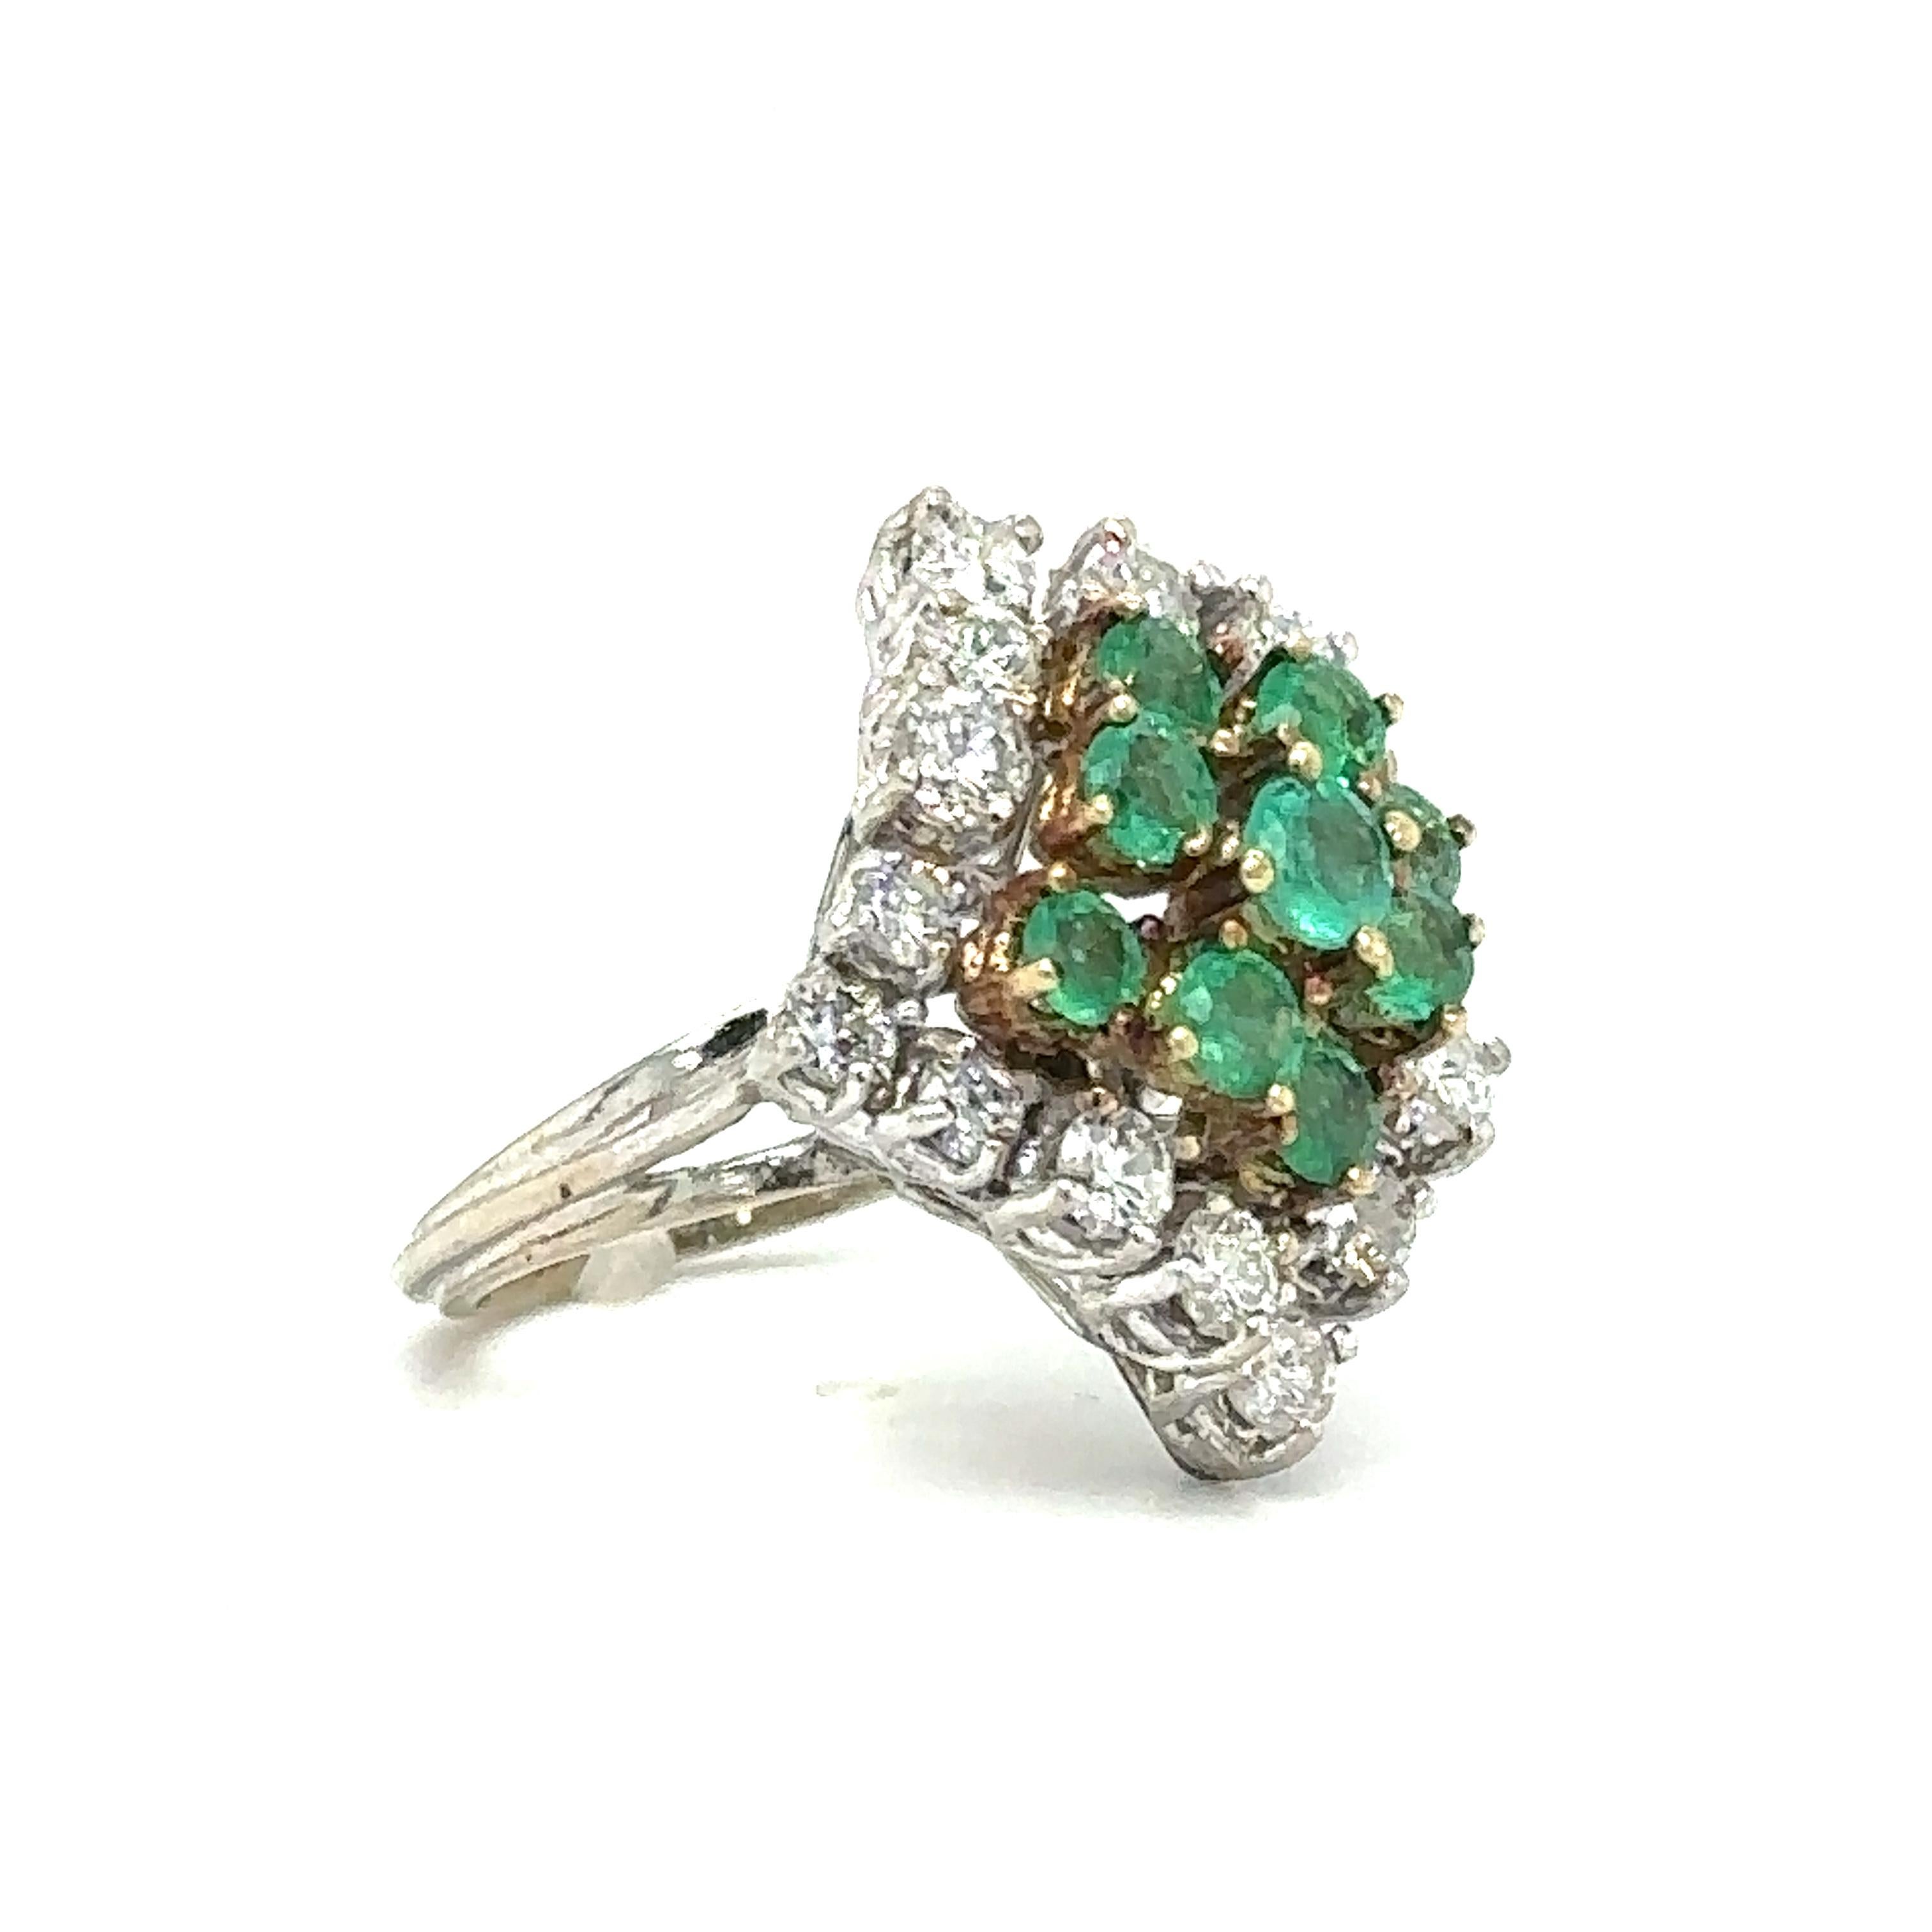 Emerald and Diamond Cocktail Ring in 14 Karat White Gold, circa 1950s For Sale